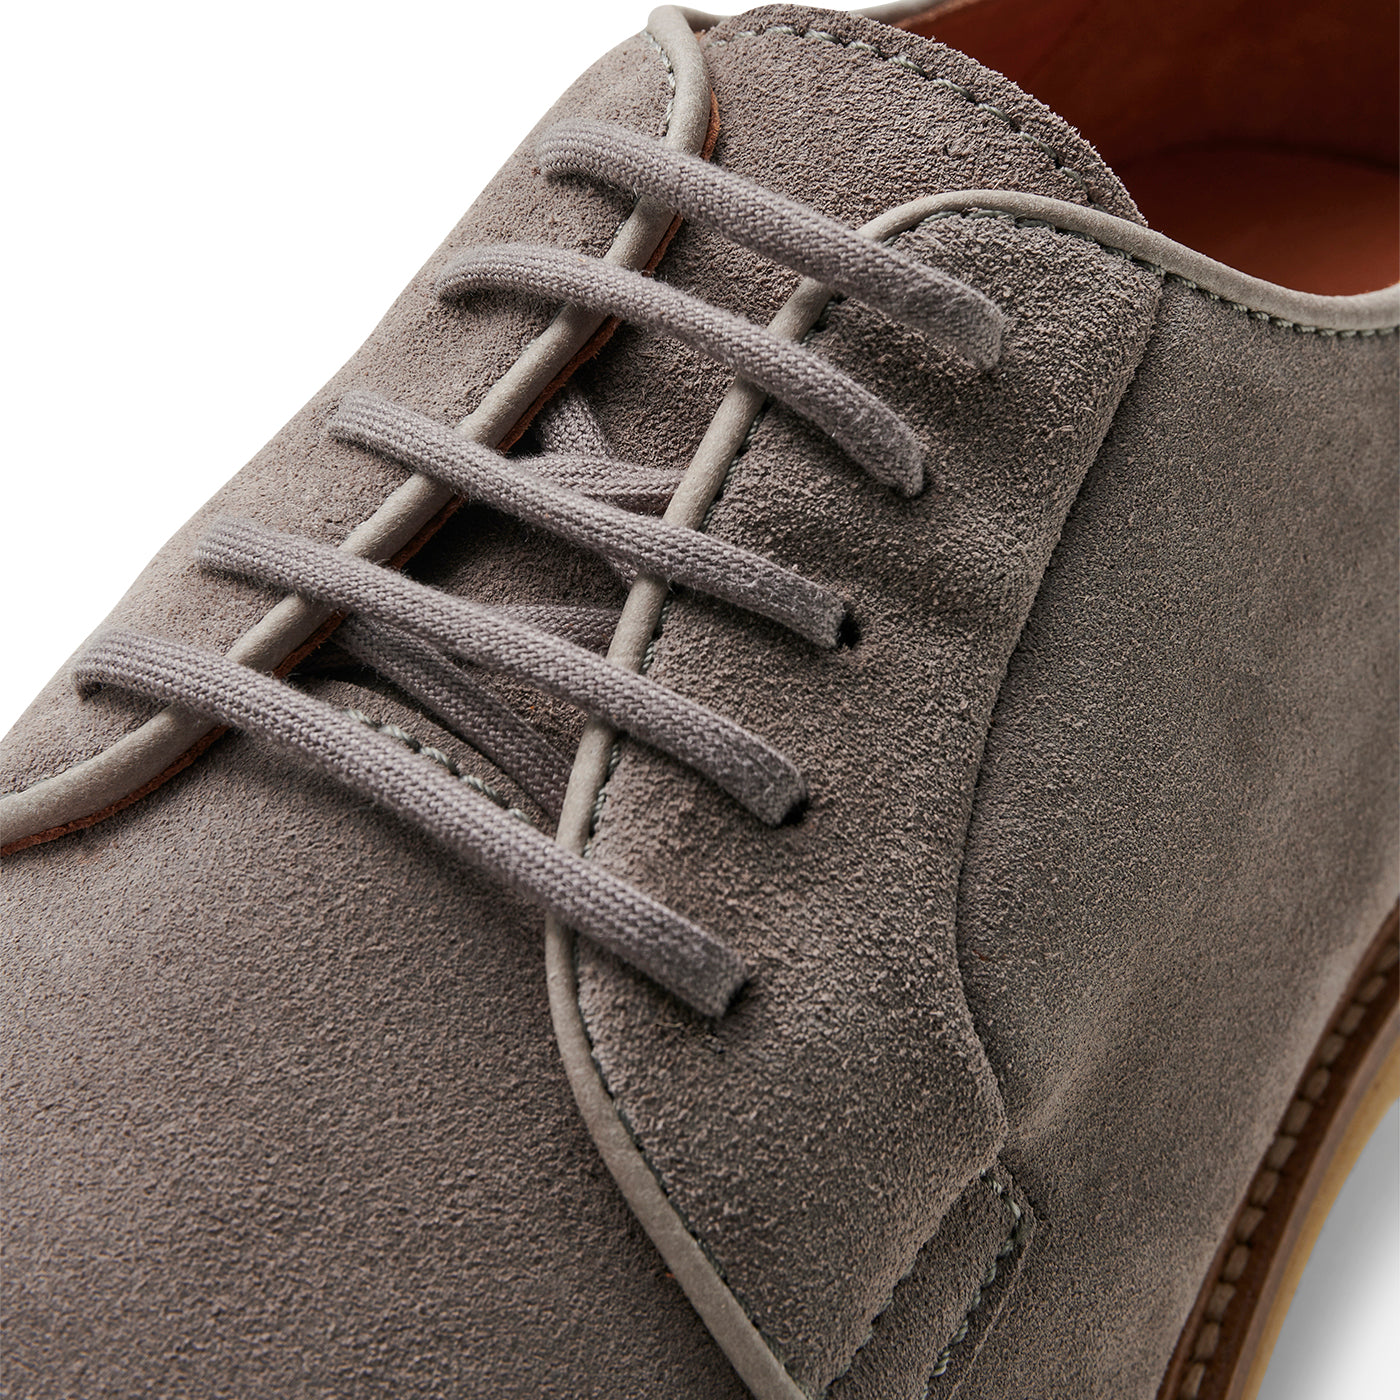 SHOE THE BEAR MENS Kip derby water repellent suede Shoes 160 TAUPE